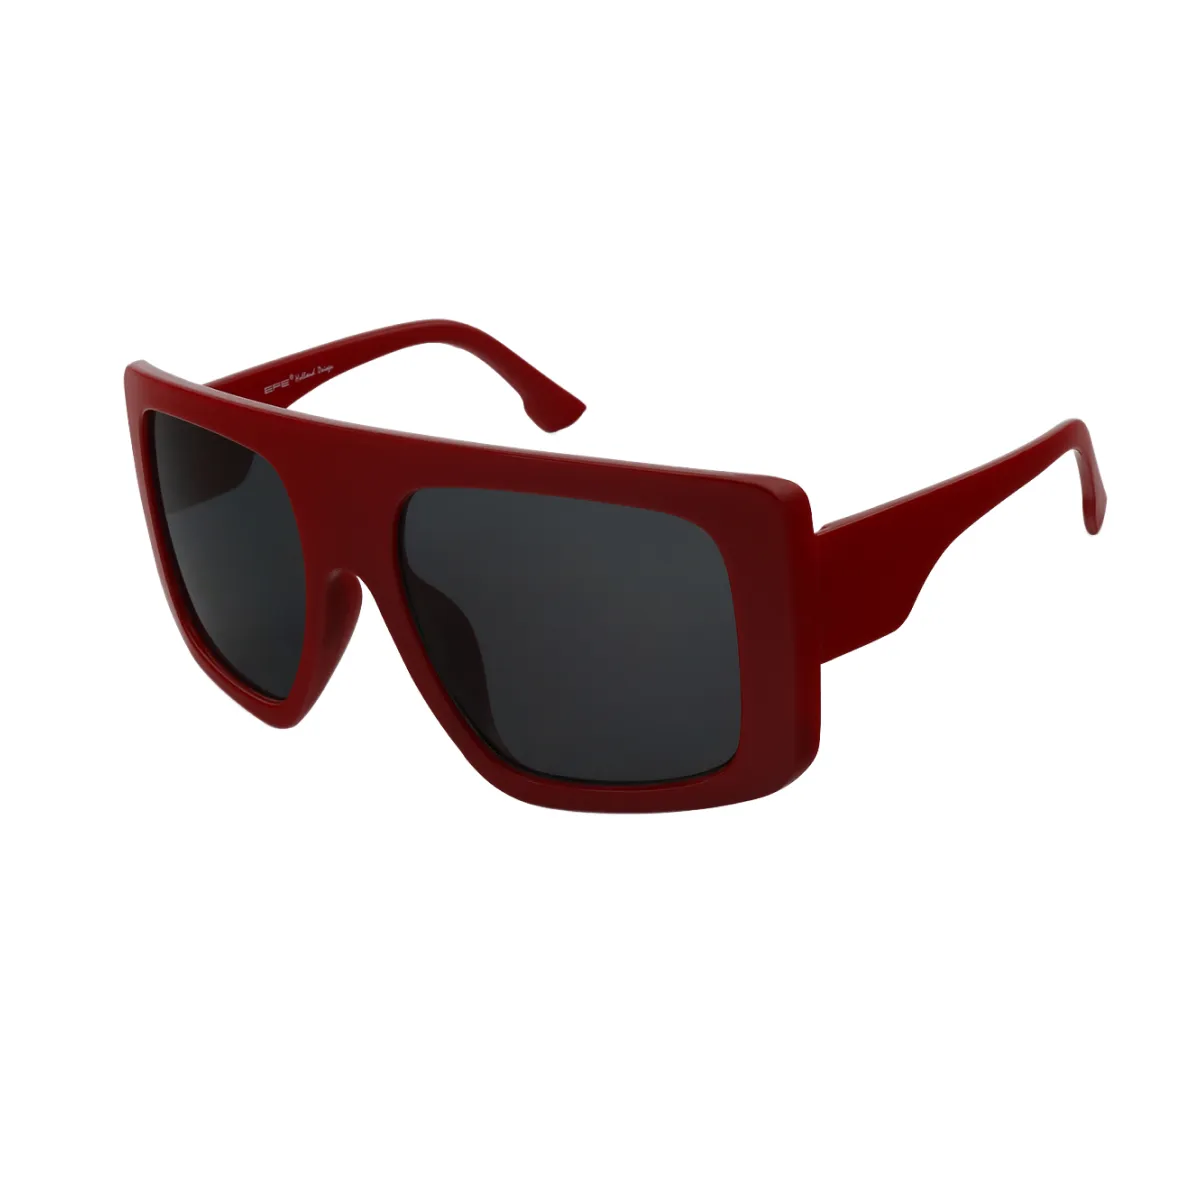 Rosalind - Square Red Sunglasses for Women